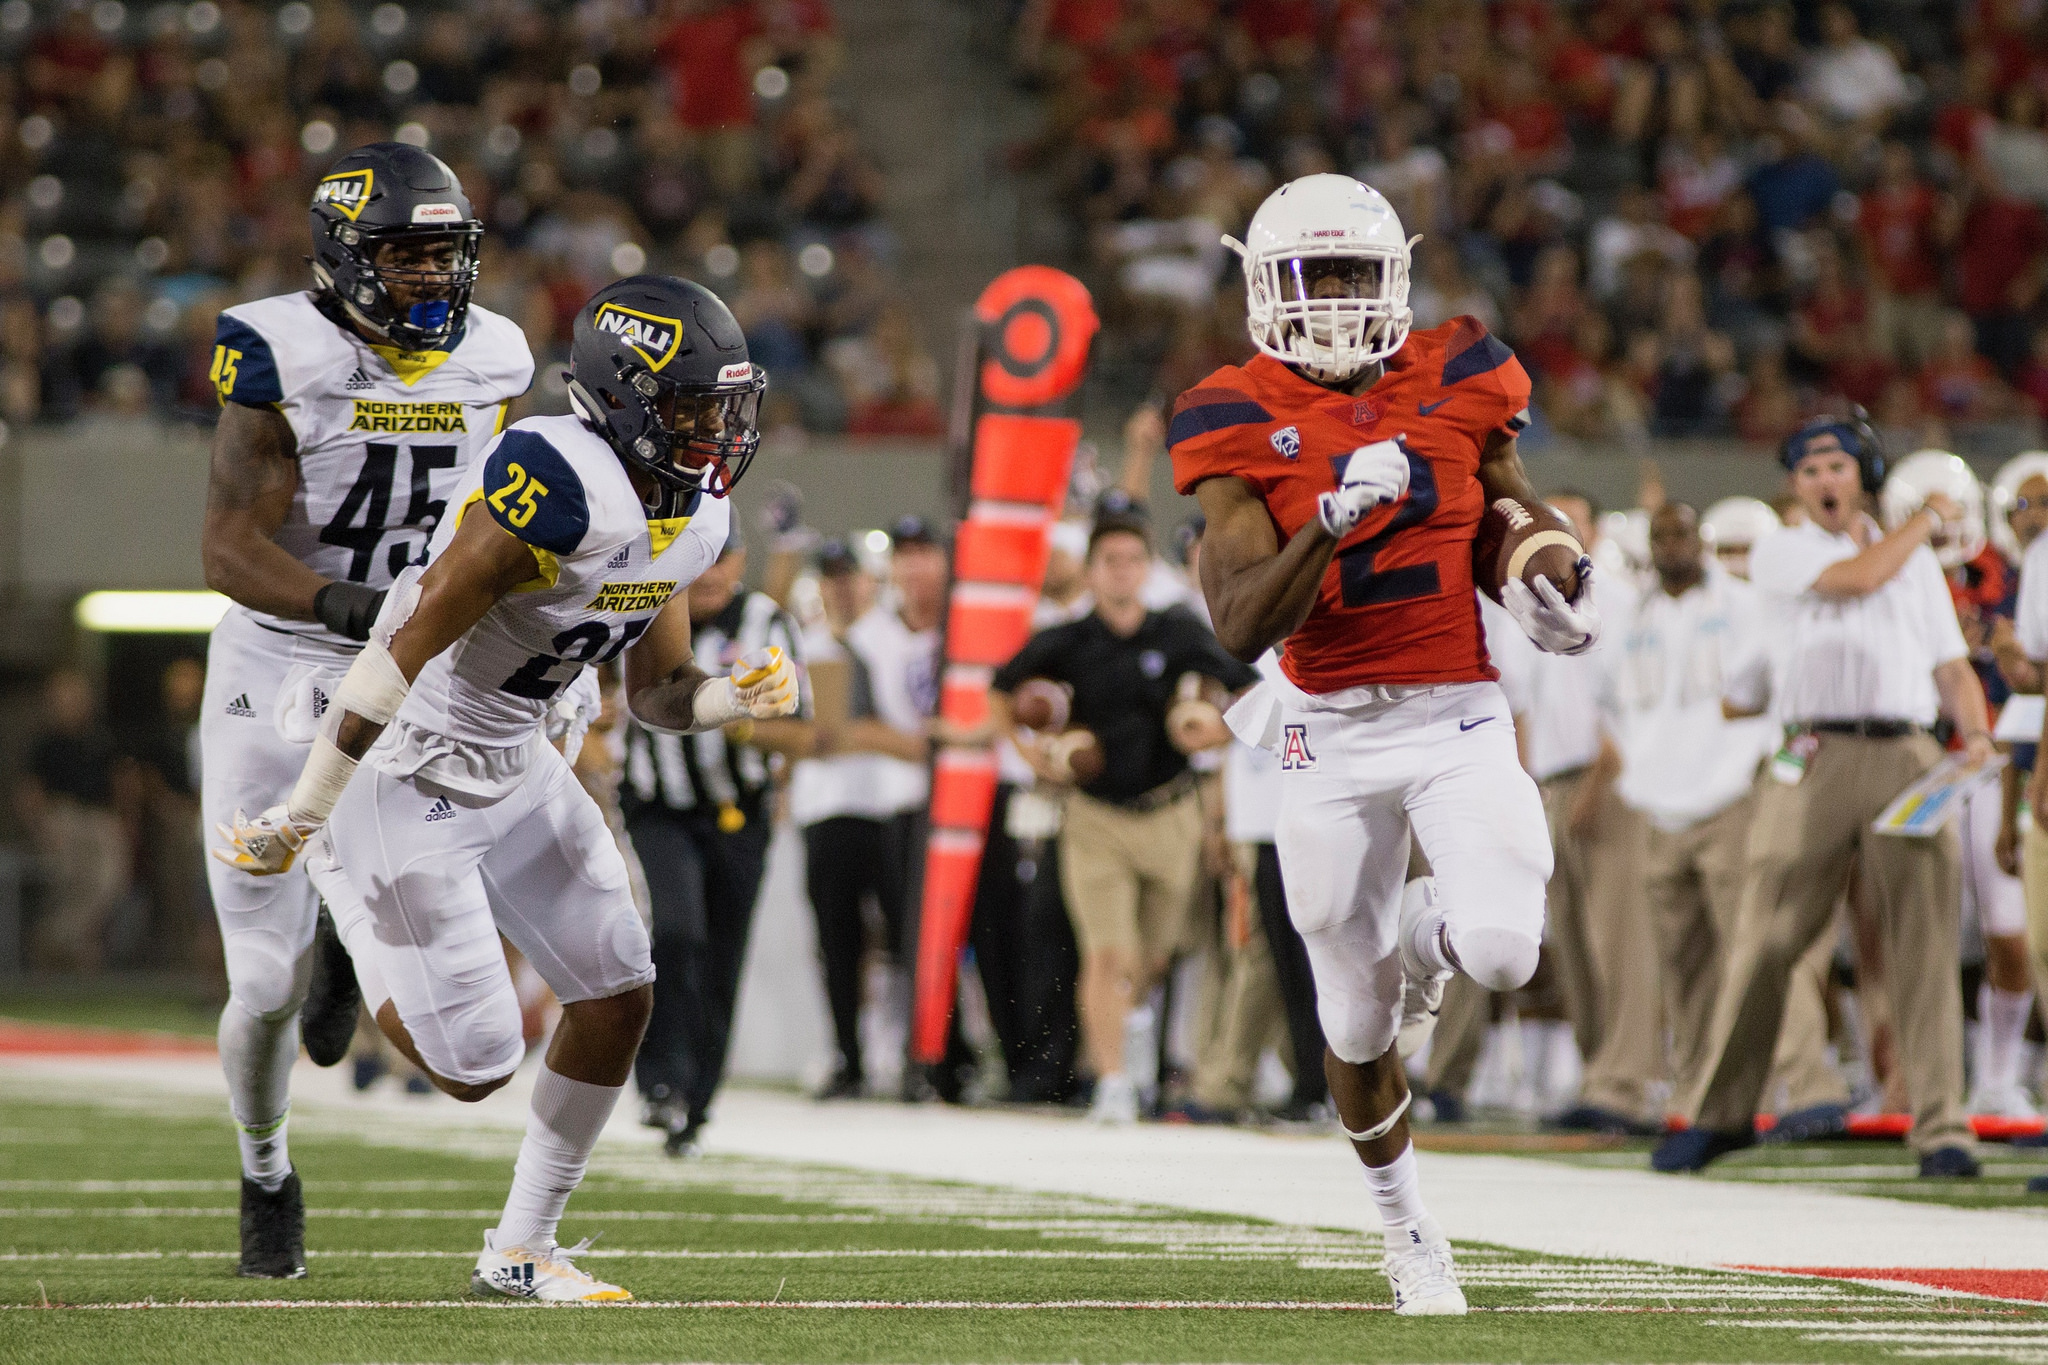 Arizona Football Preview: The New Kings of the PAC-12 South